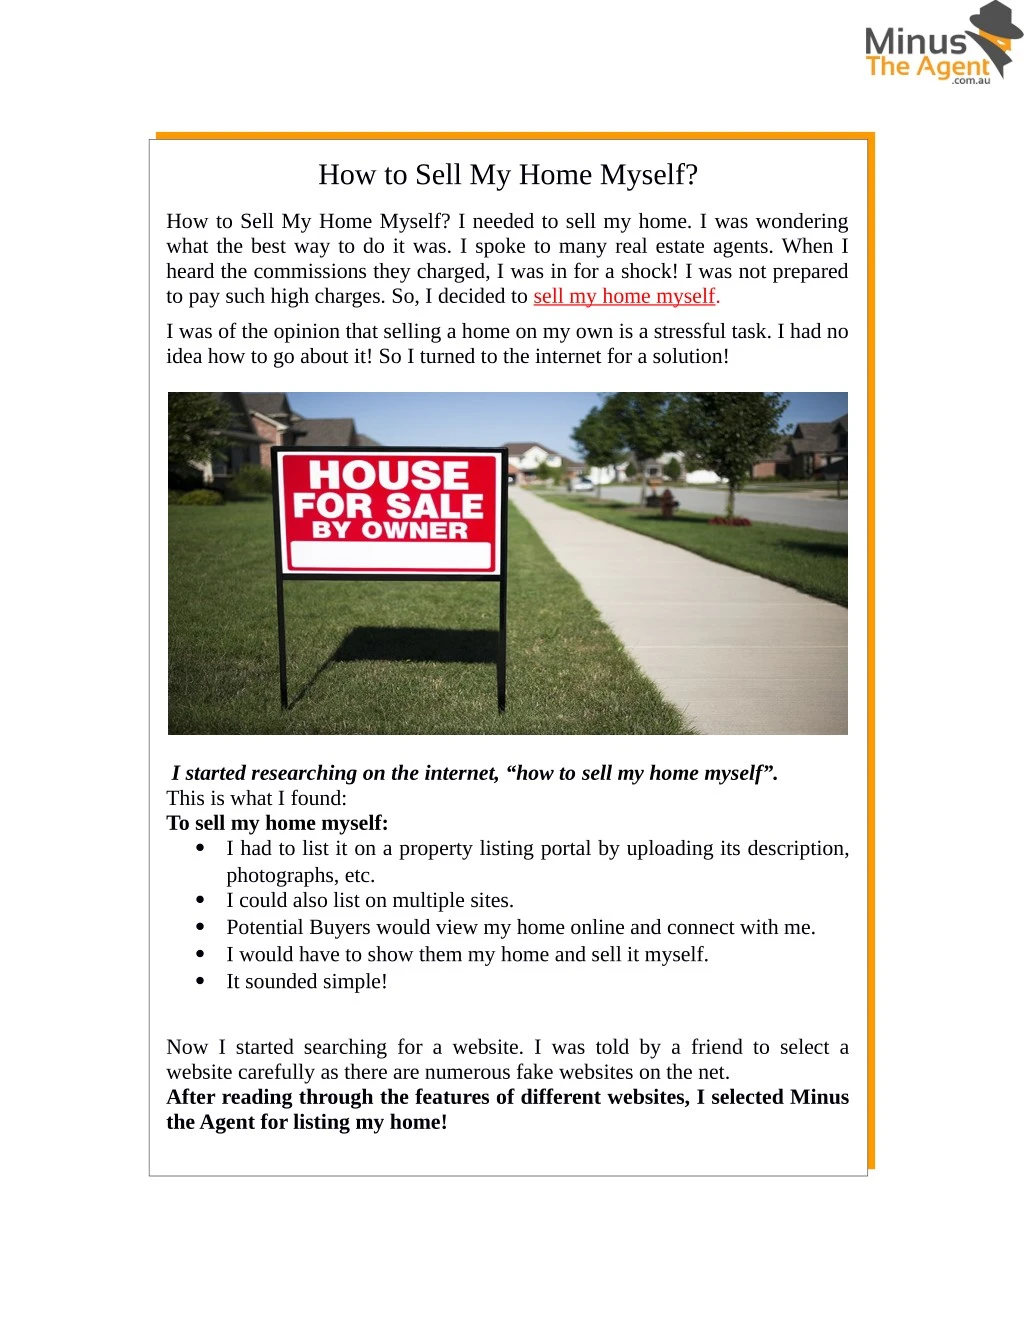 how to sell my home myself